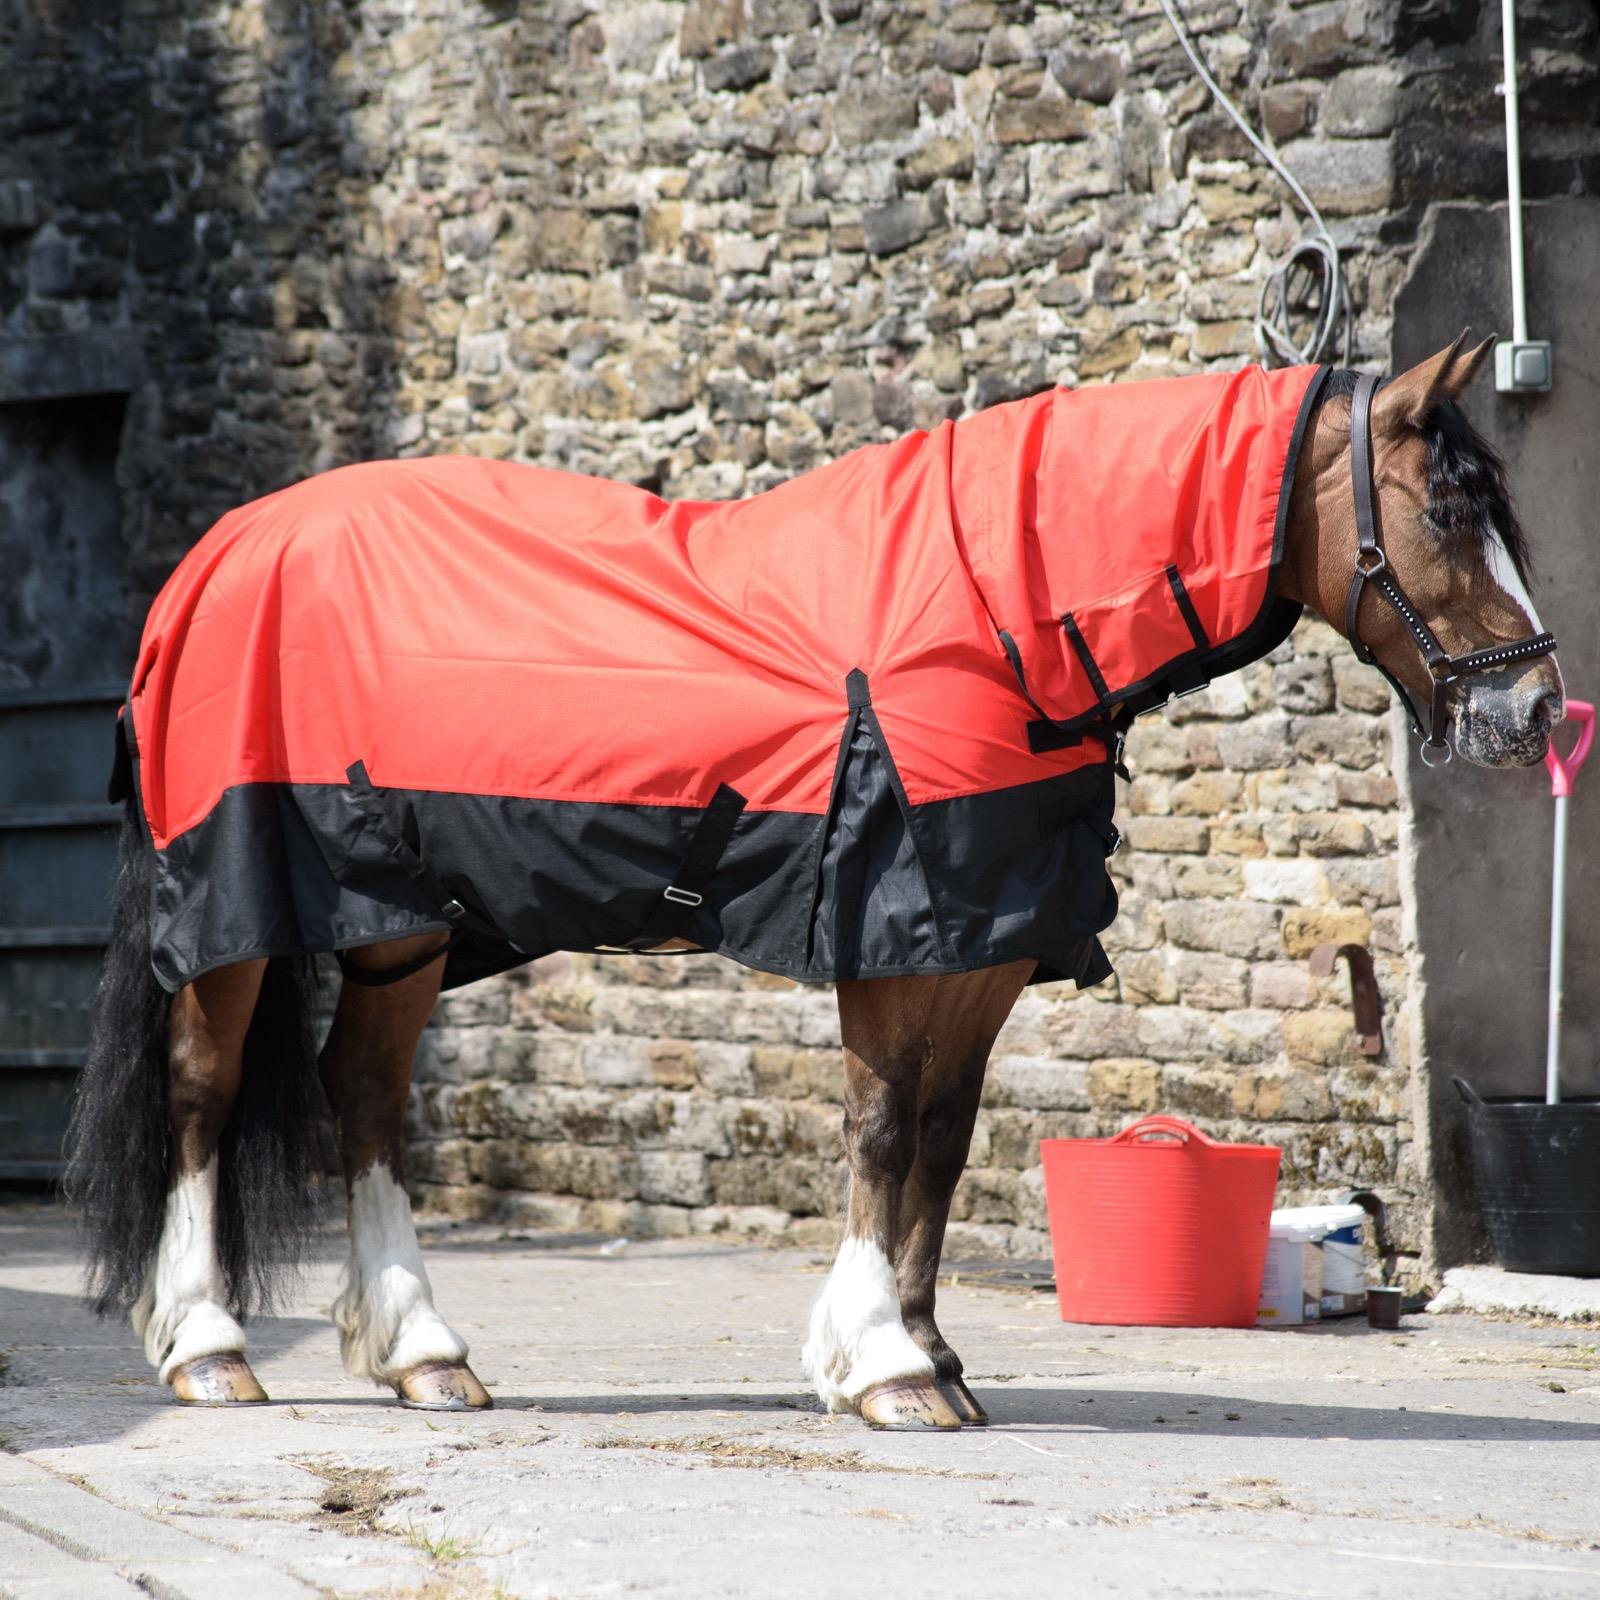 600D Outdoor Winter Turnout Horse Rugs 50G Fill COMBO Full Neck Red/Black 5'3-6'9